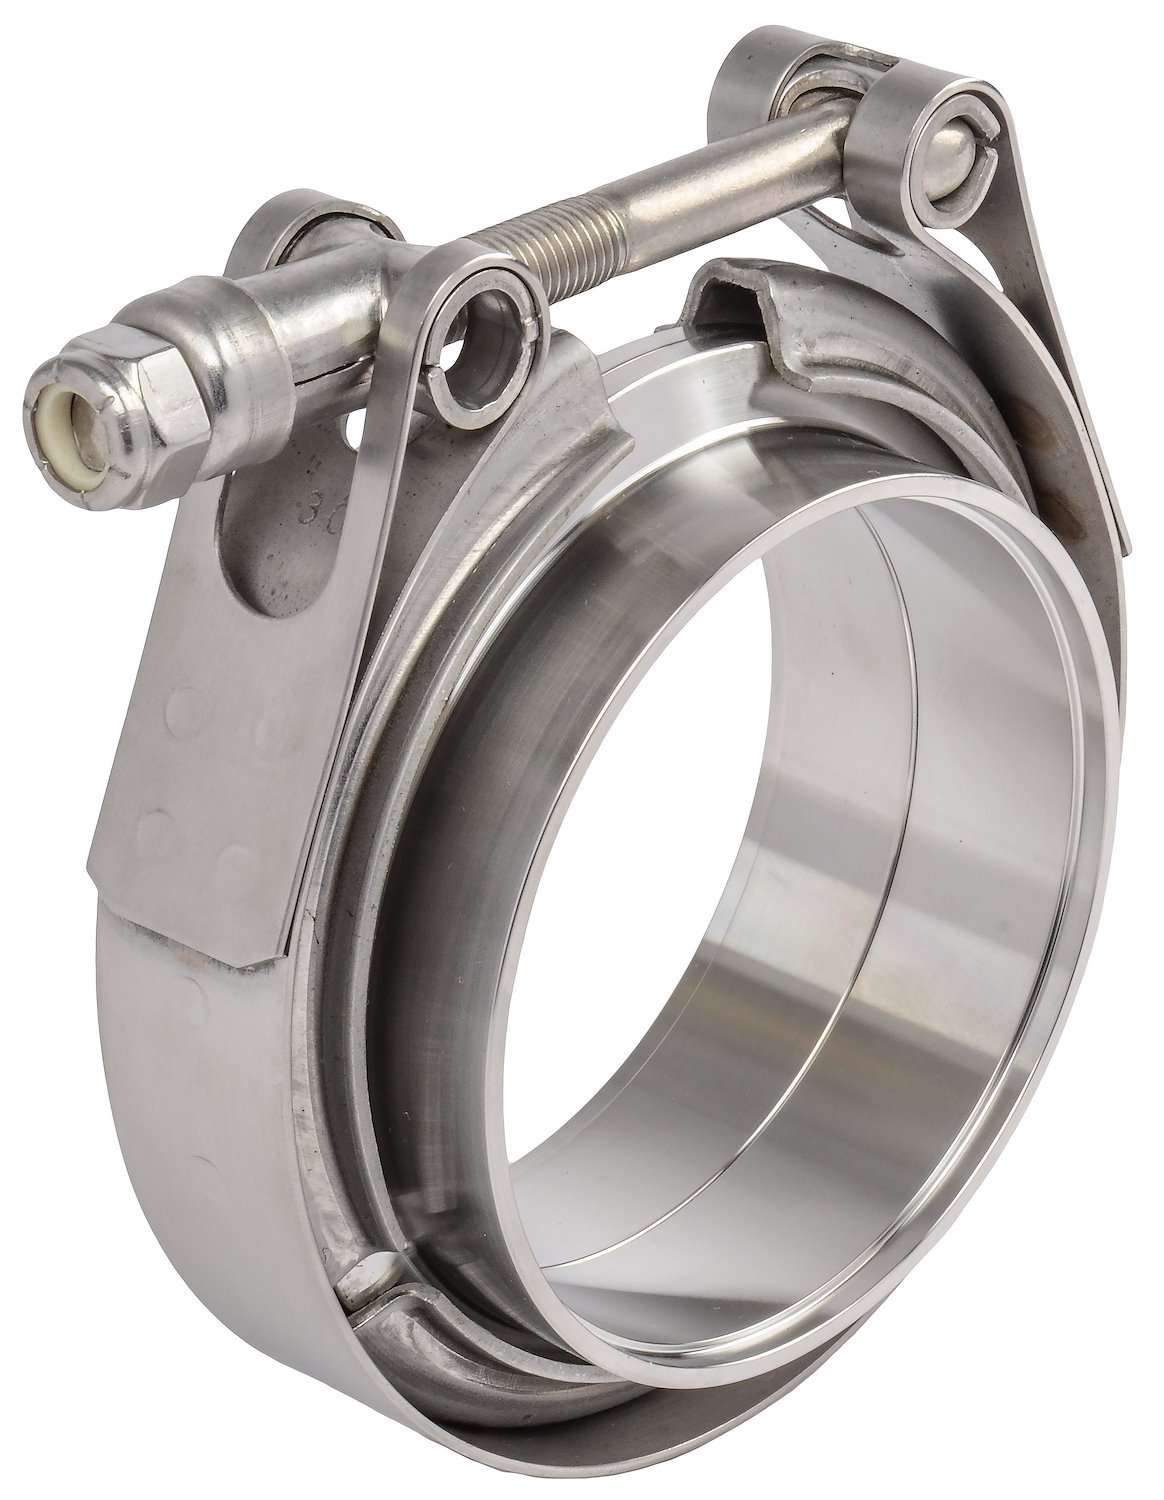 Stainless Steel Standard V-Band Clamp & Flanges 3